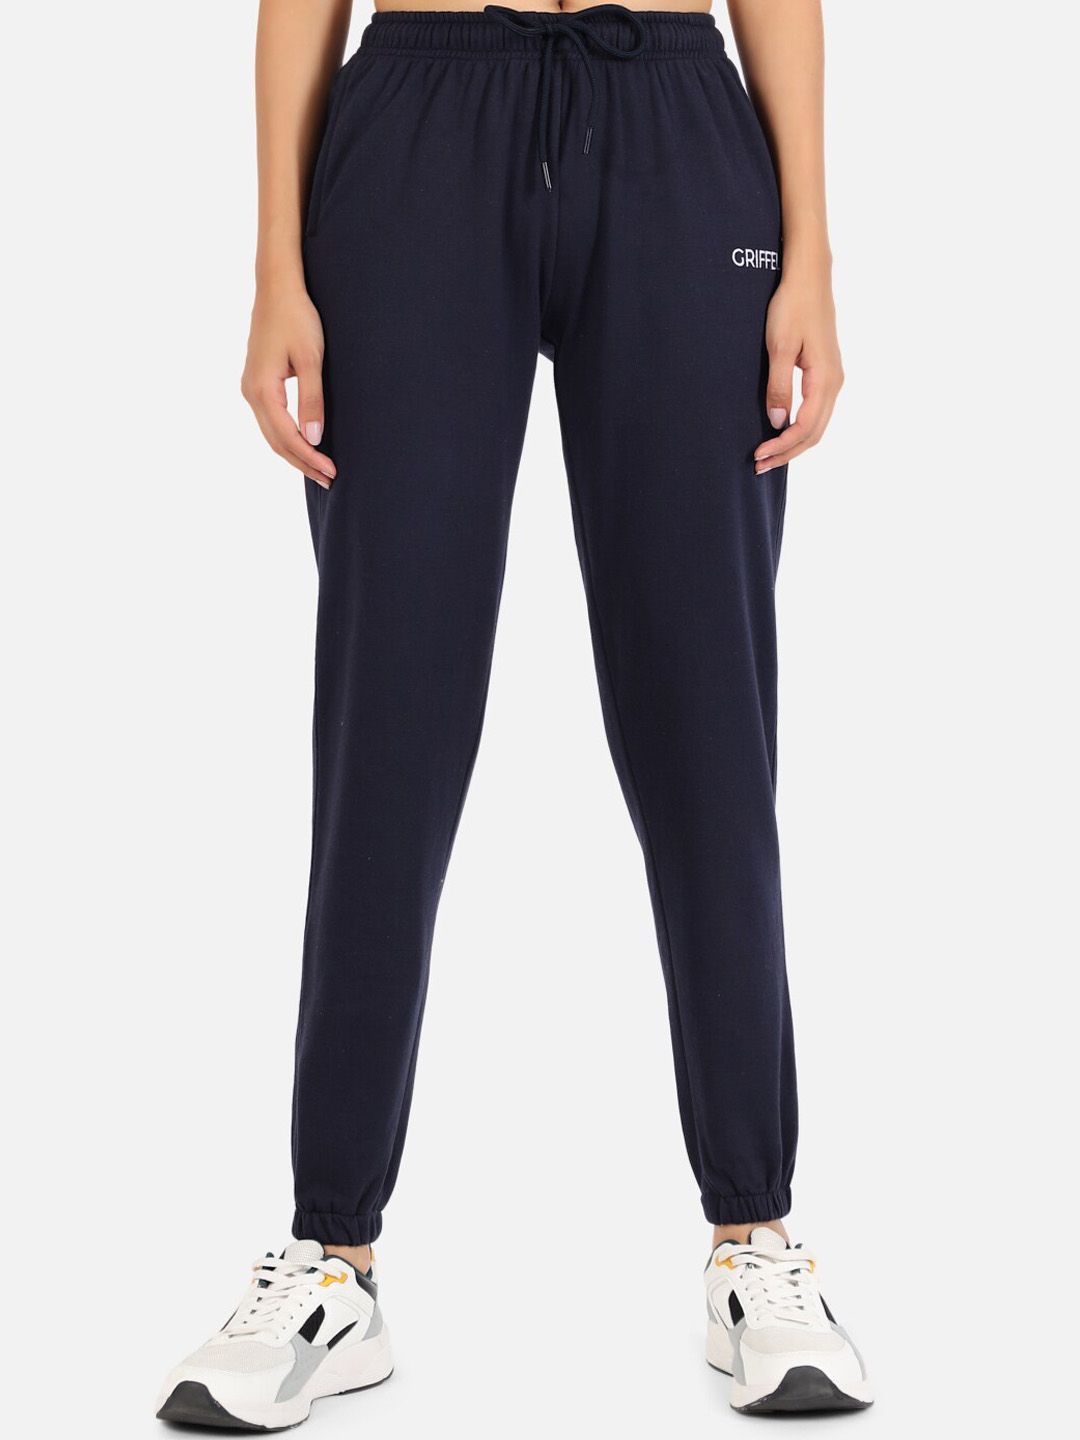 GRIFFEL Women Navy Blue Cotton Solid Sports Joggers Price in India